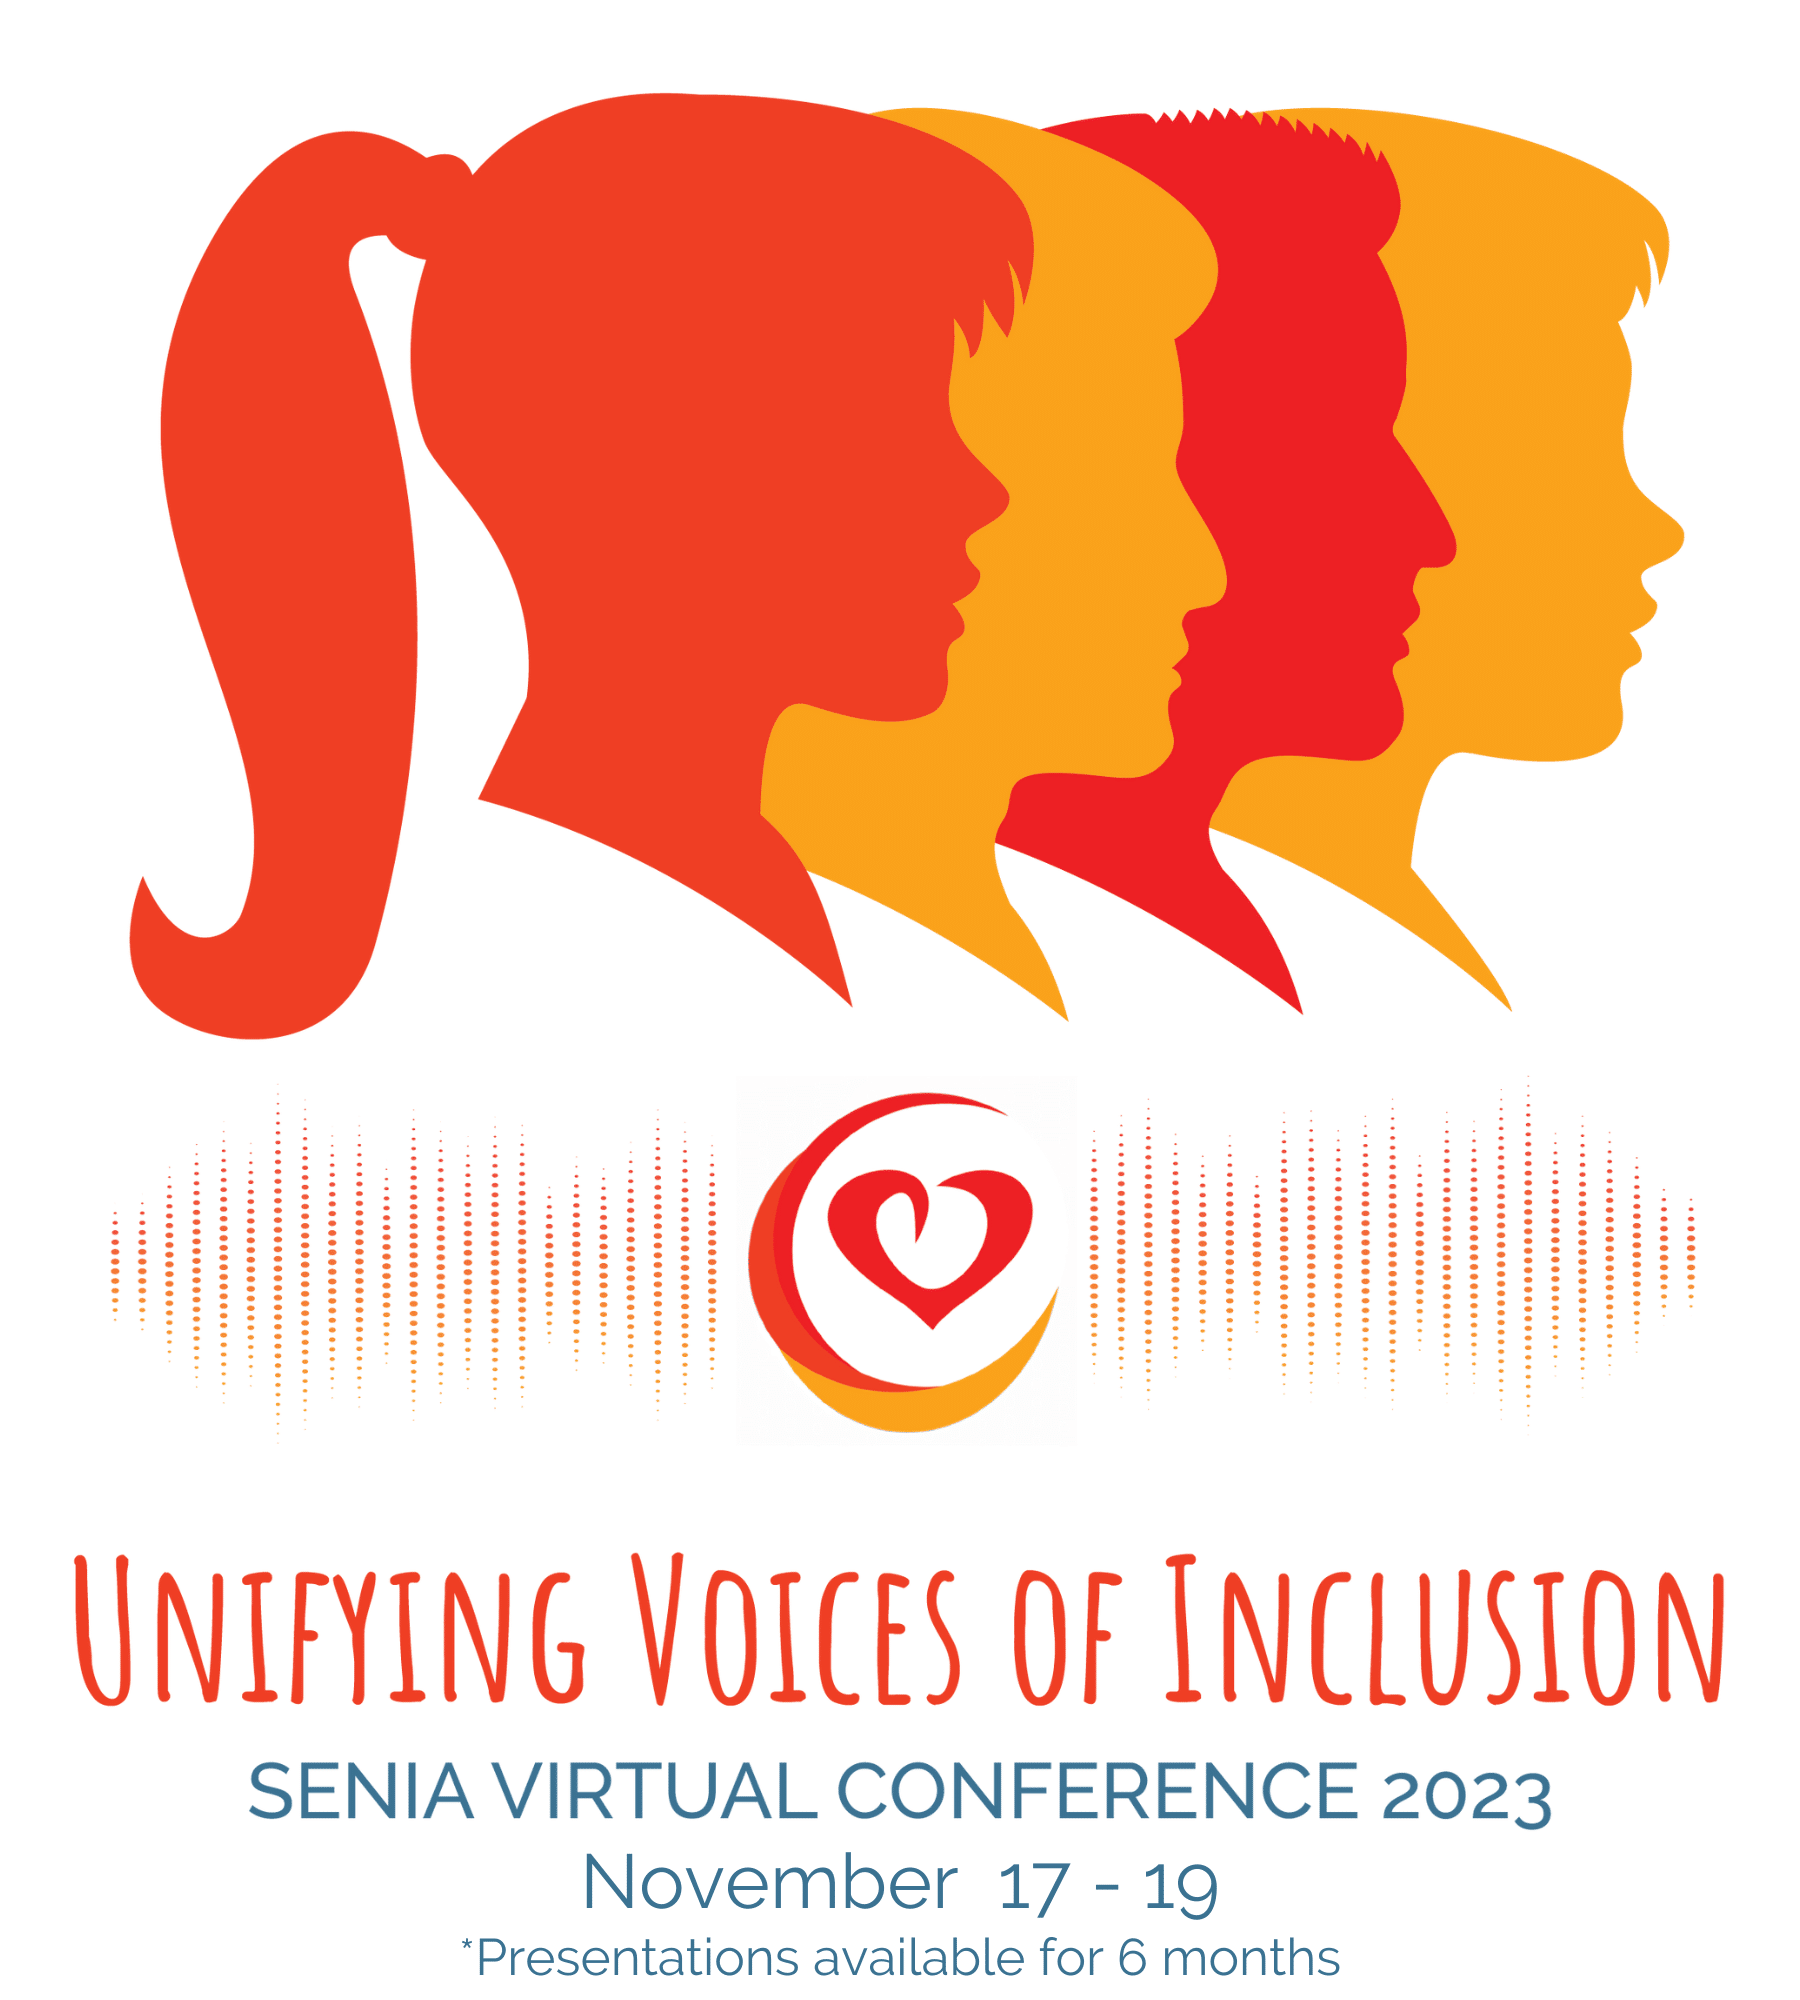 Unifying voices of inclusion conference logo